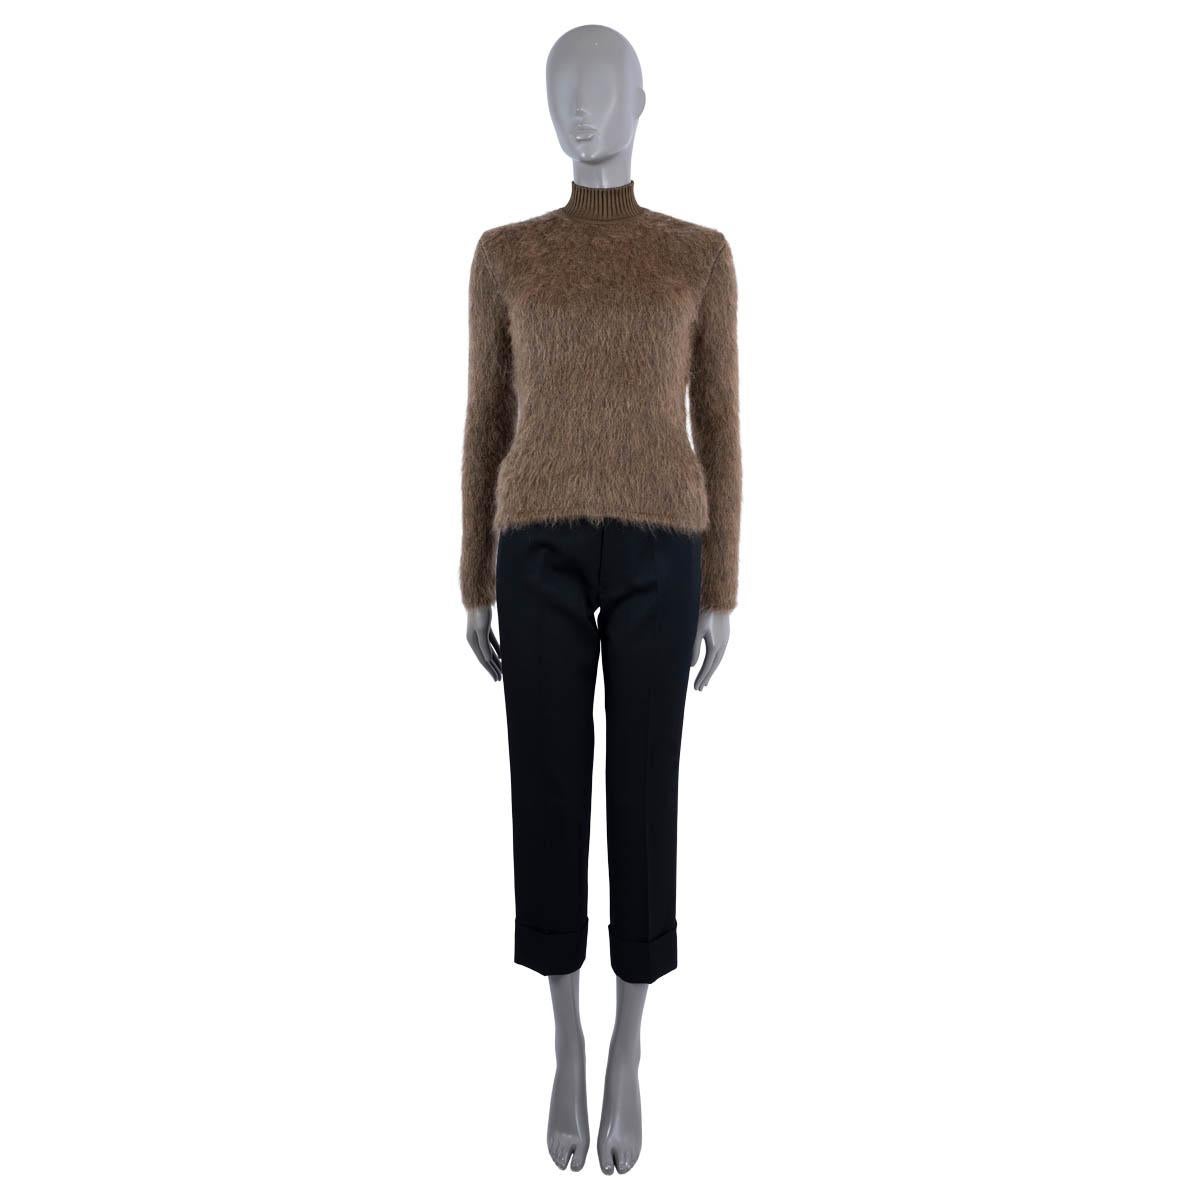 100% authentic Hermès fuzzy sweater in moss green wool (36%), silk (24%), mohair (24%) and cashmere (16%). Features a mock neck in rib-knit silk (with 4% polyamide). Hass been worn and is in excellent condition.

2022 Fall/Winter

Measurements
Tag